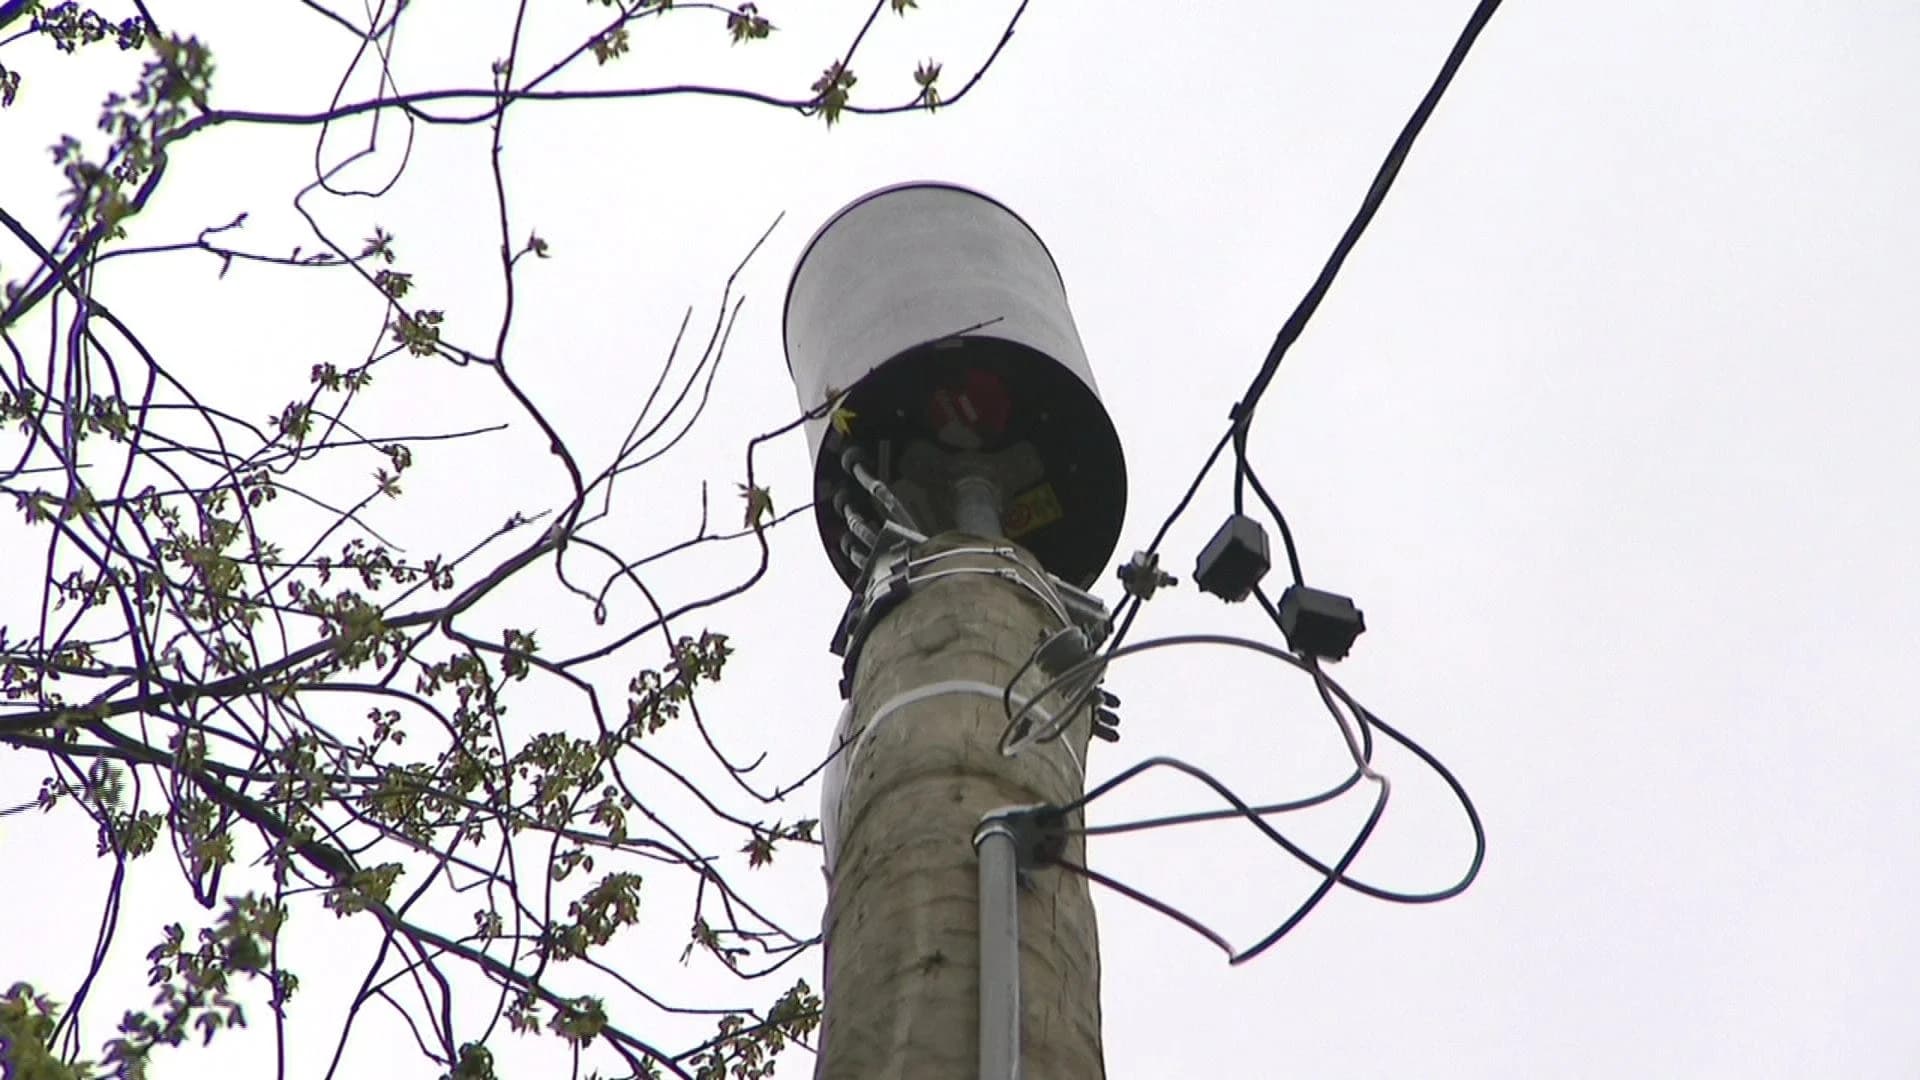 Huntington residents concerned over new cellphone towers